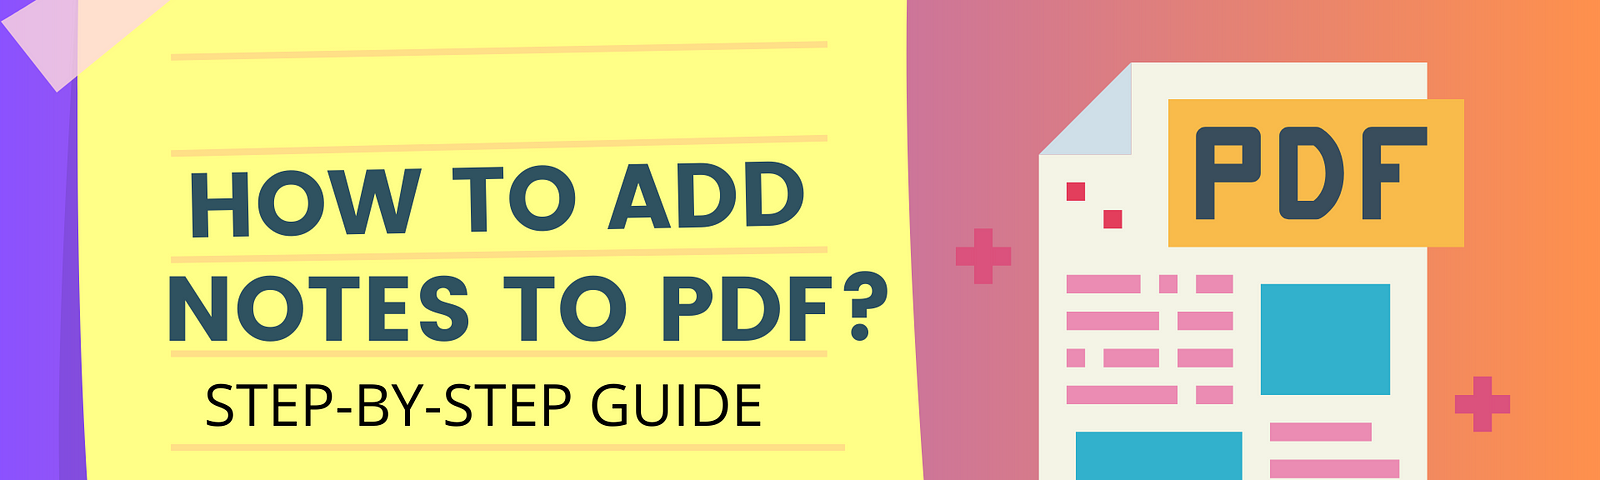 How to add notes to PDF